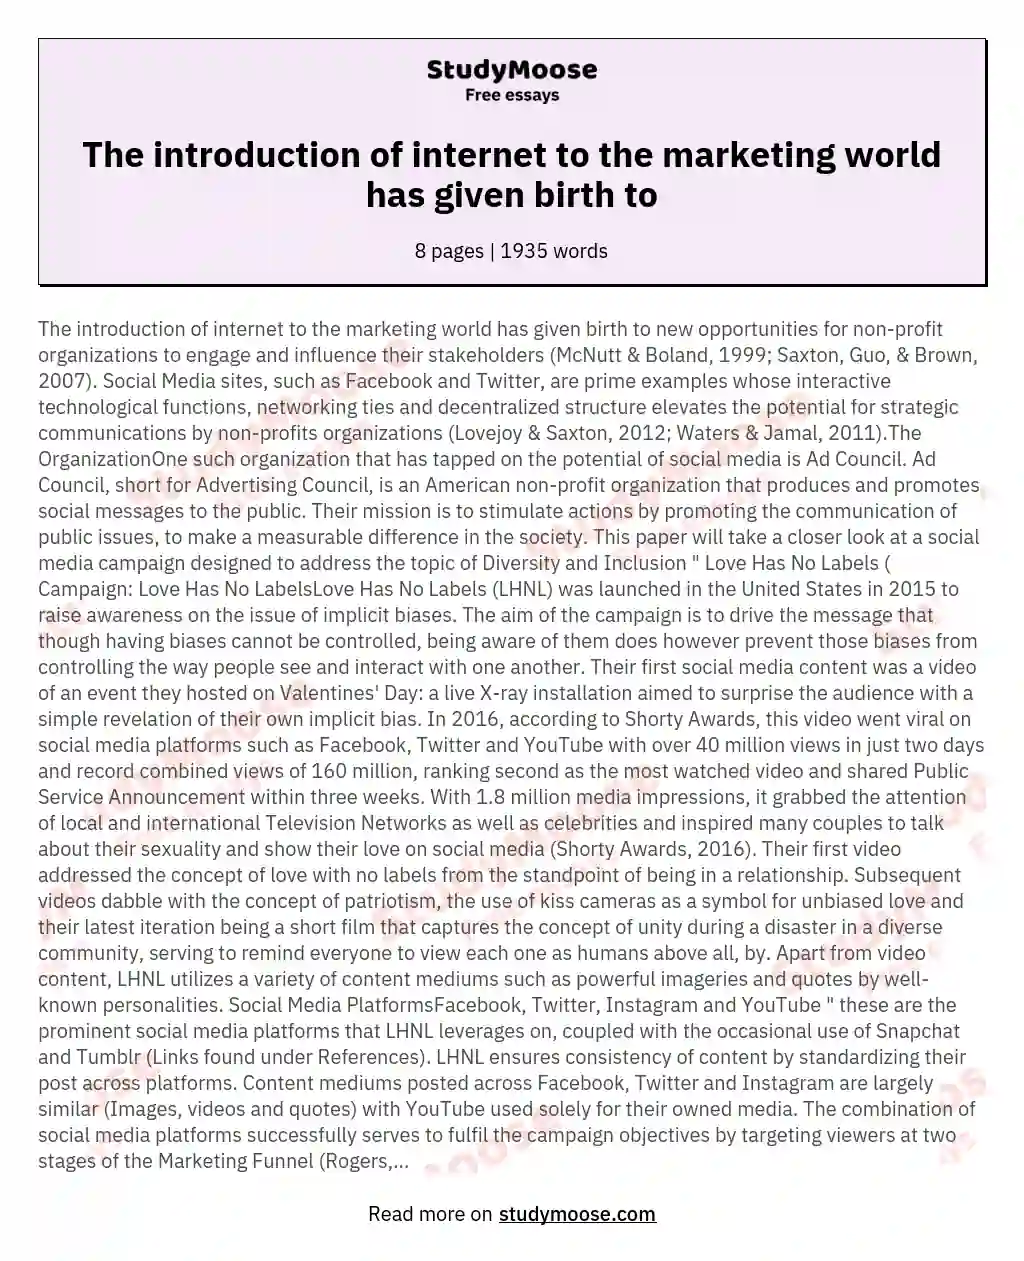 The introduction of internet to the marketing world has given birth to